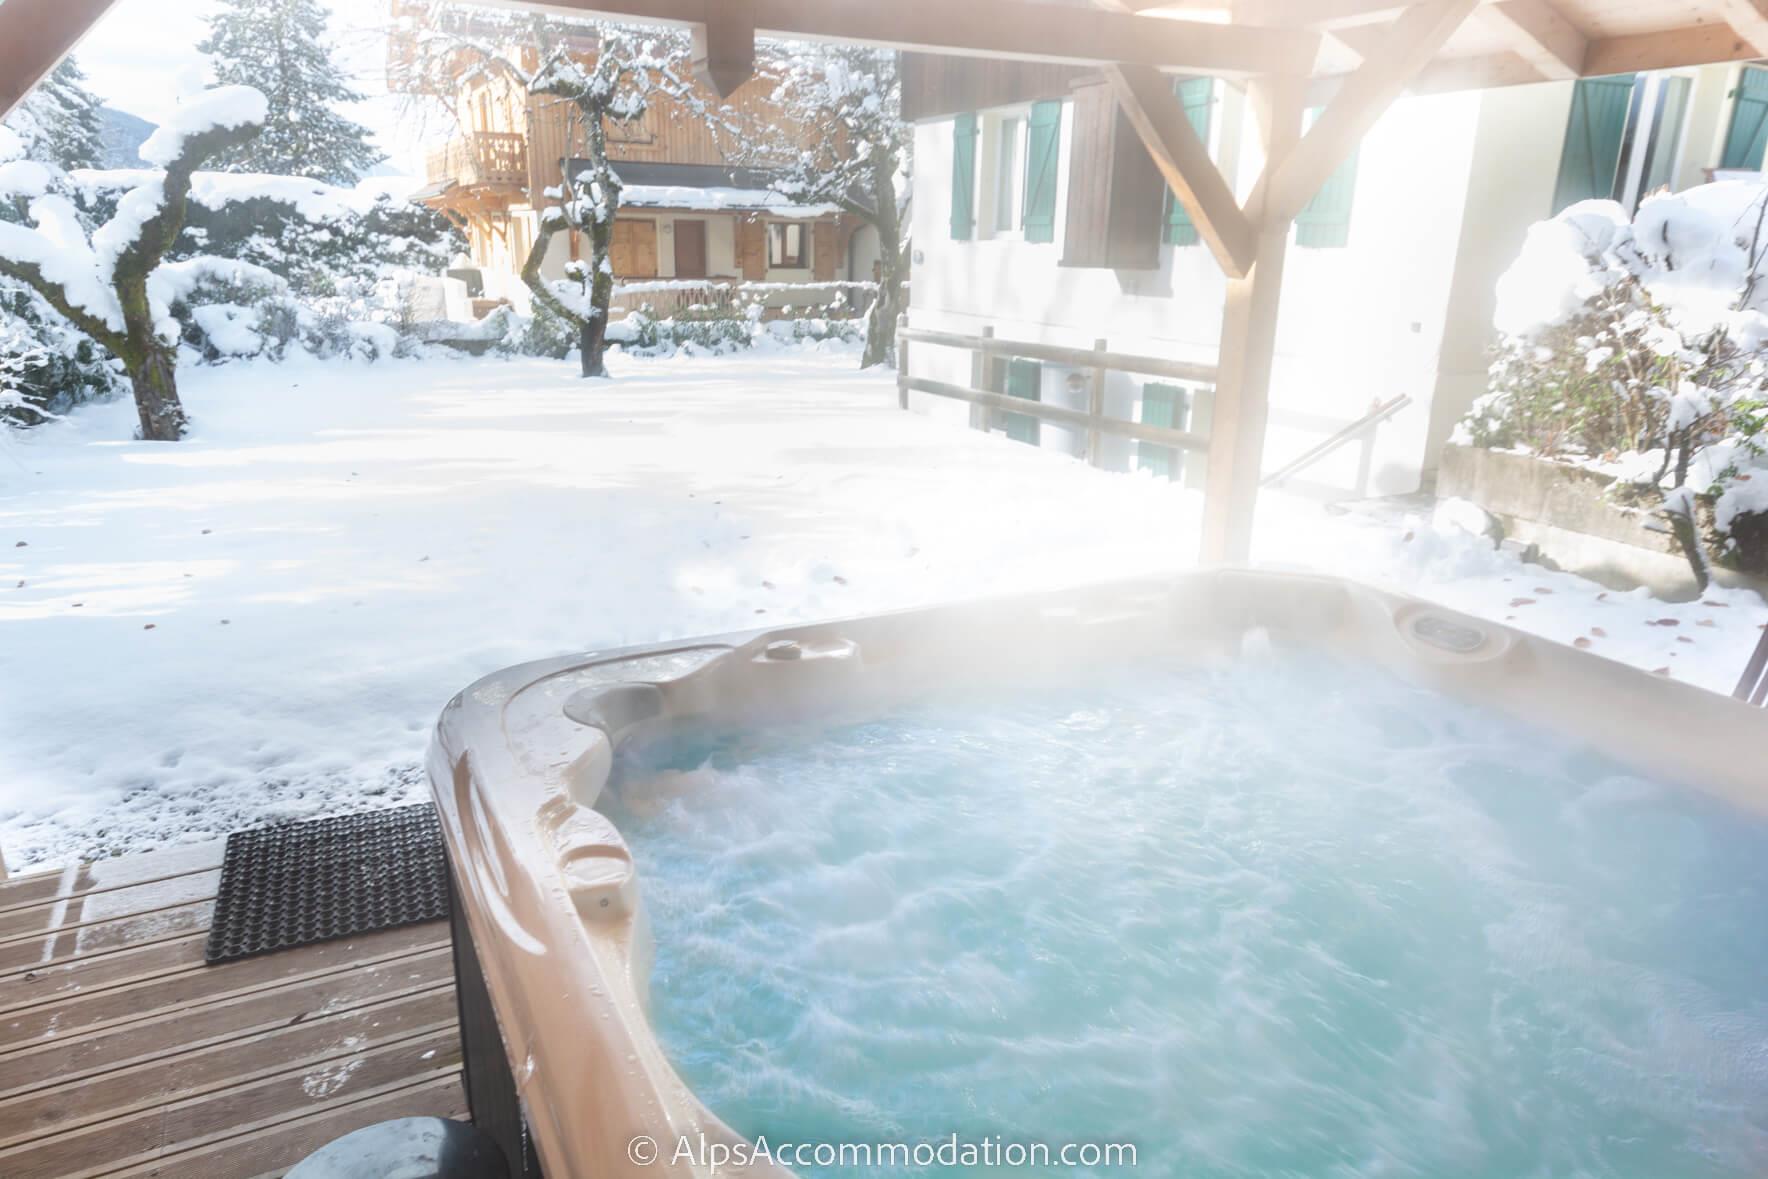 Chalet Chamoissière Samoëns - Hot tub surrounded by fluffy snow